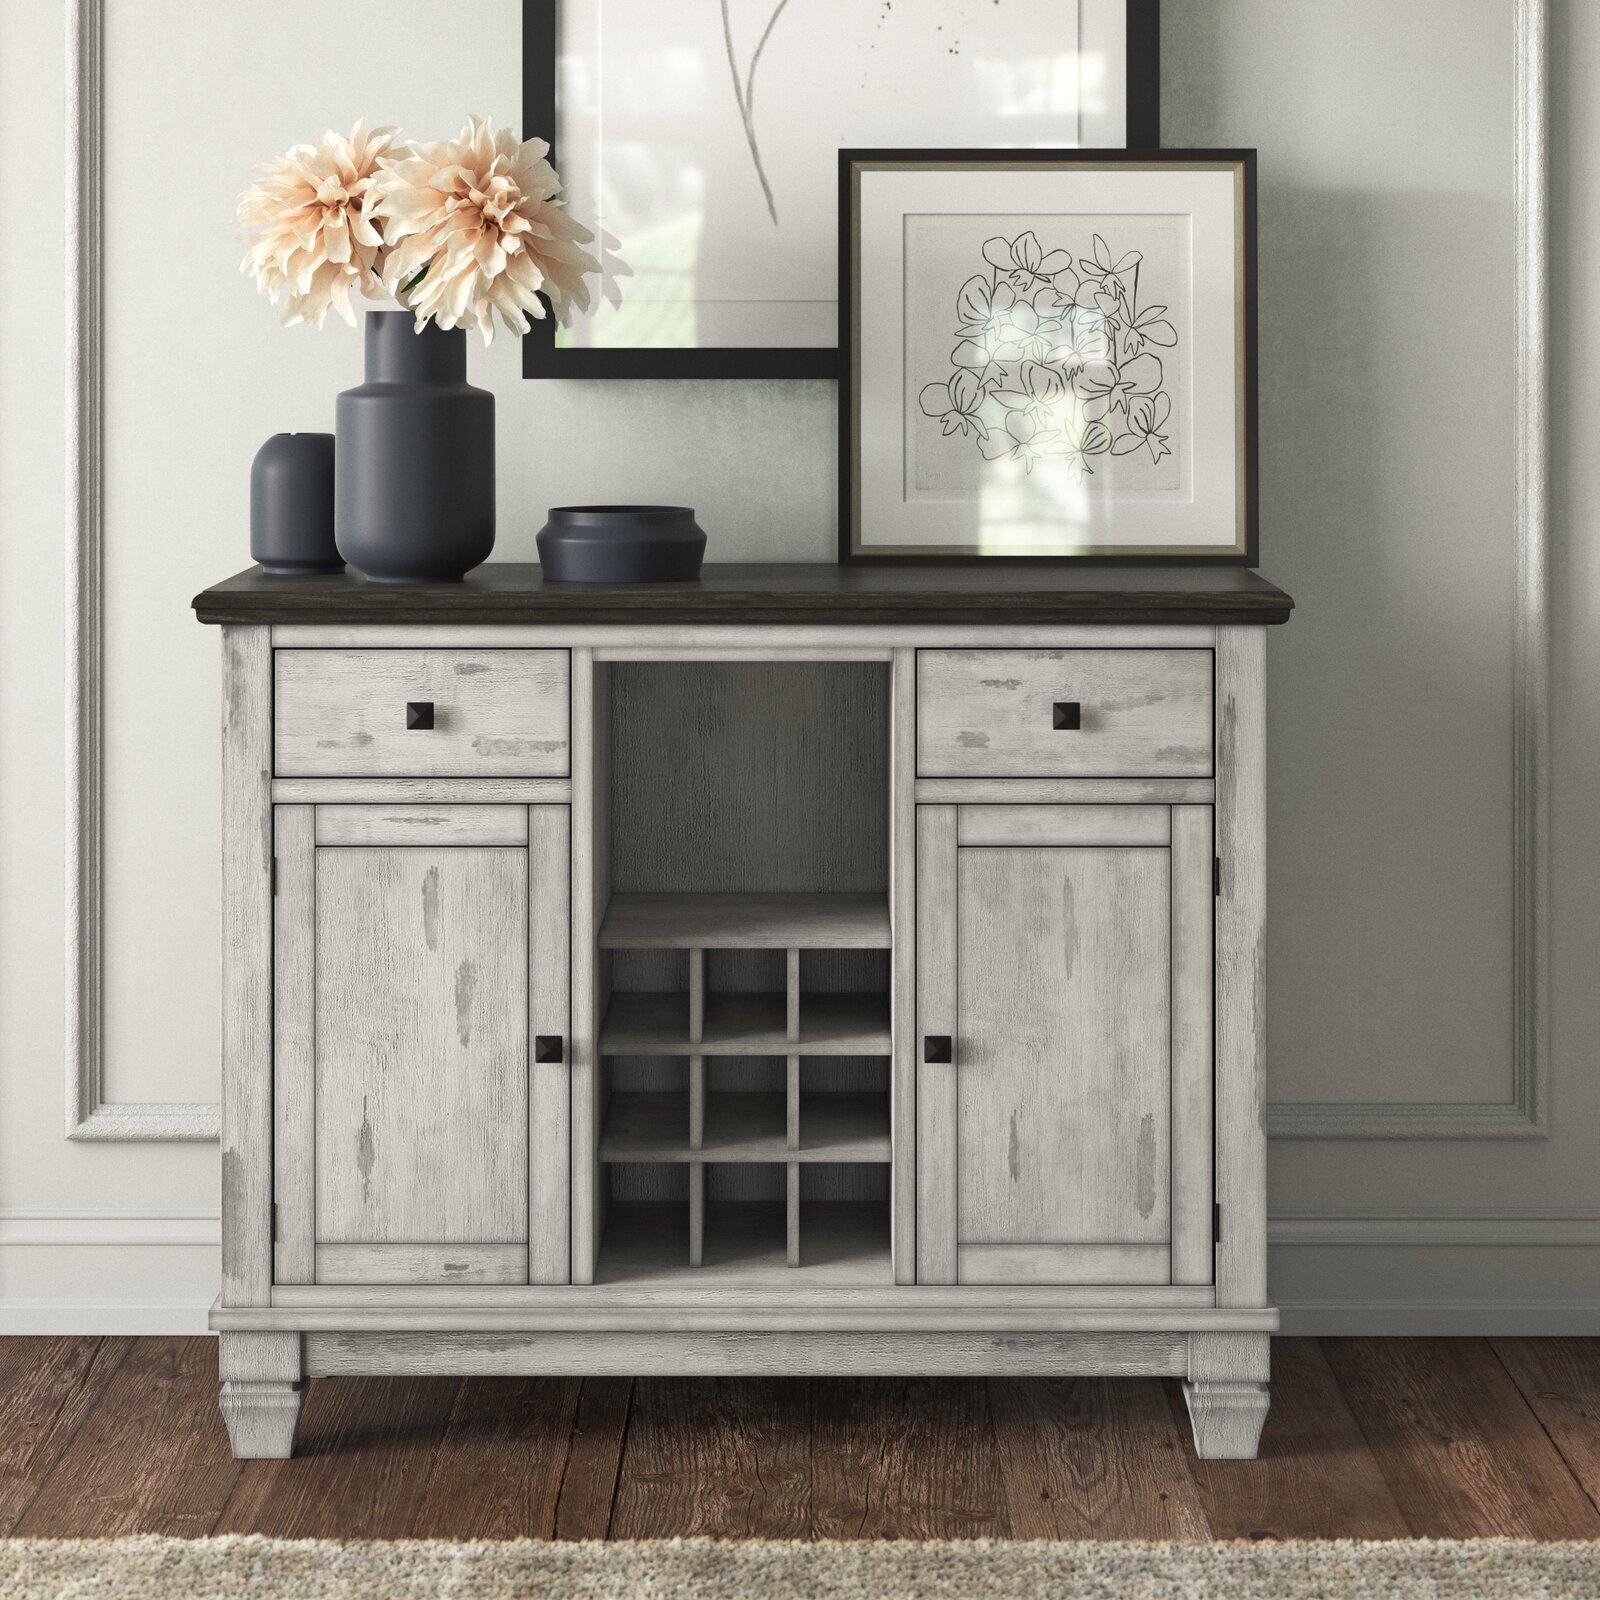 Distressed buffet cabinet with different storage solutions